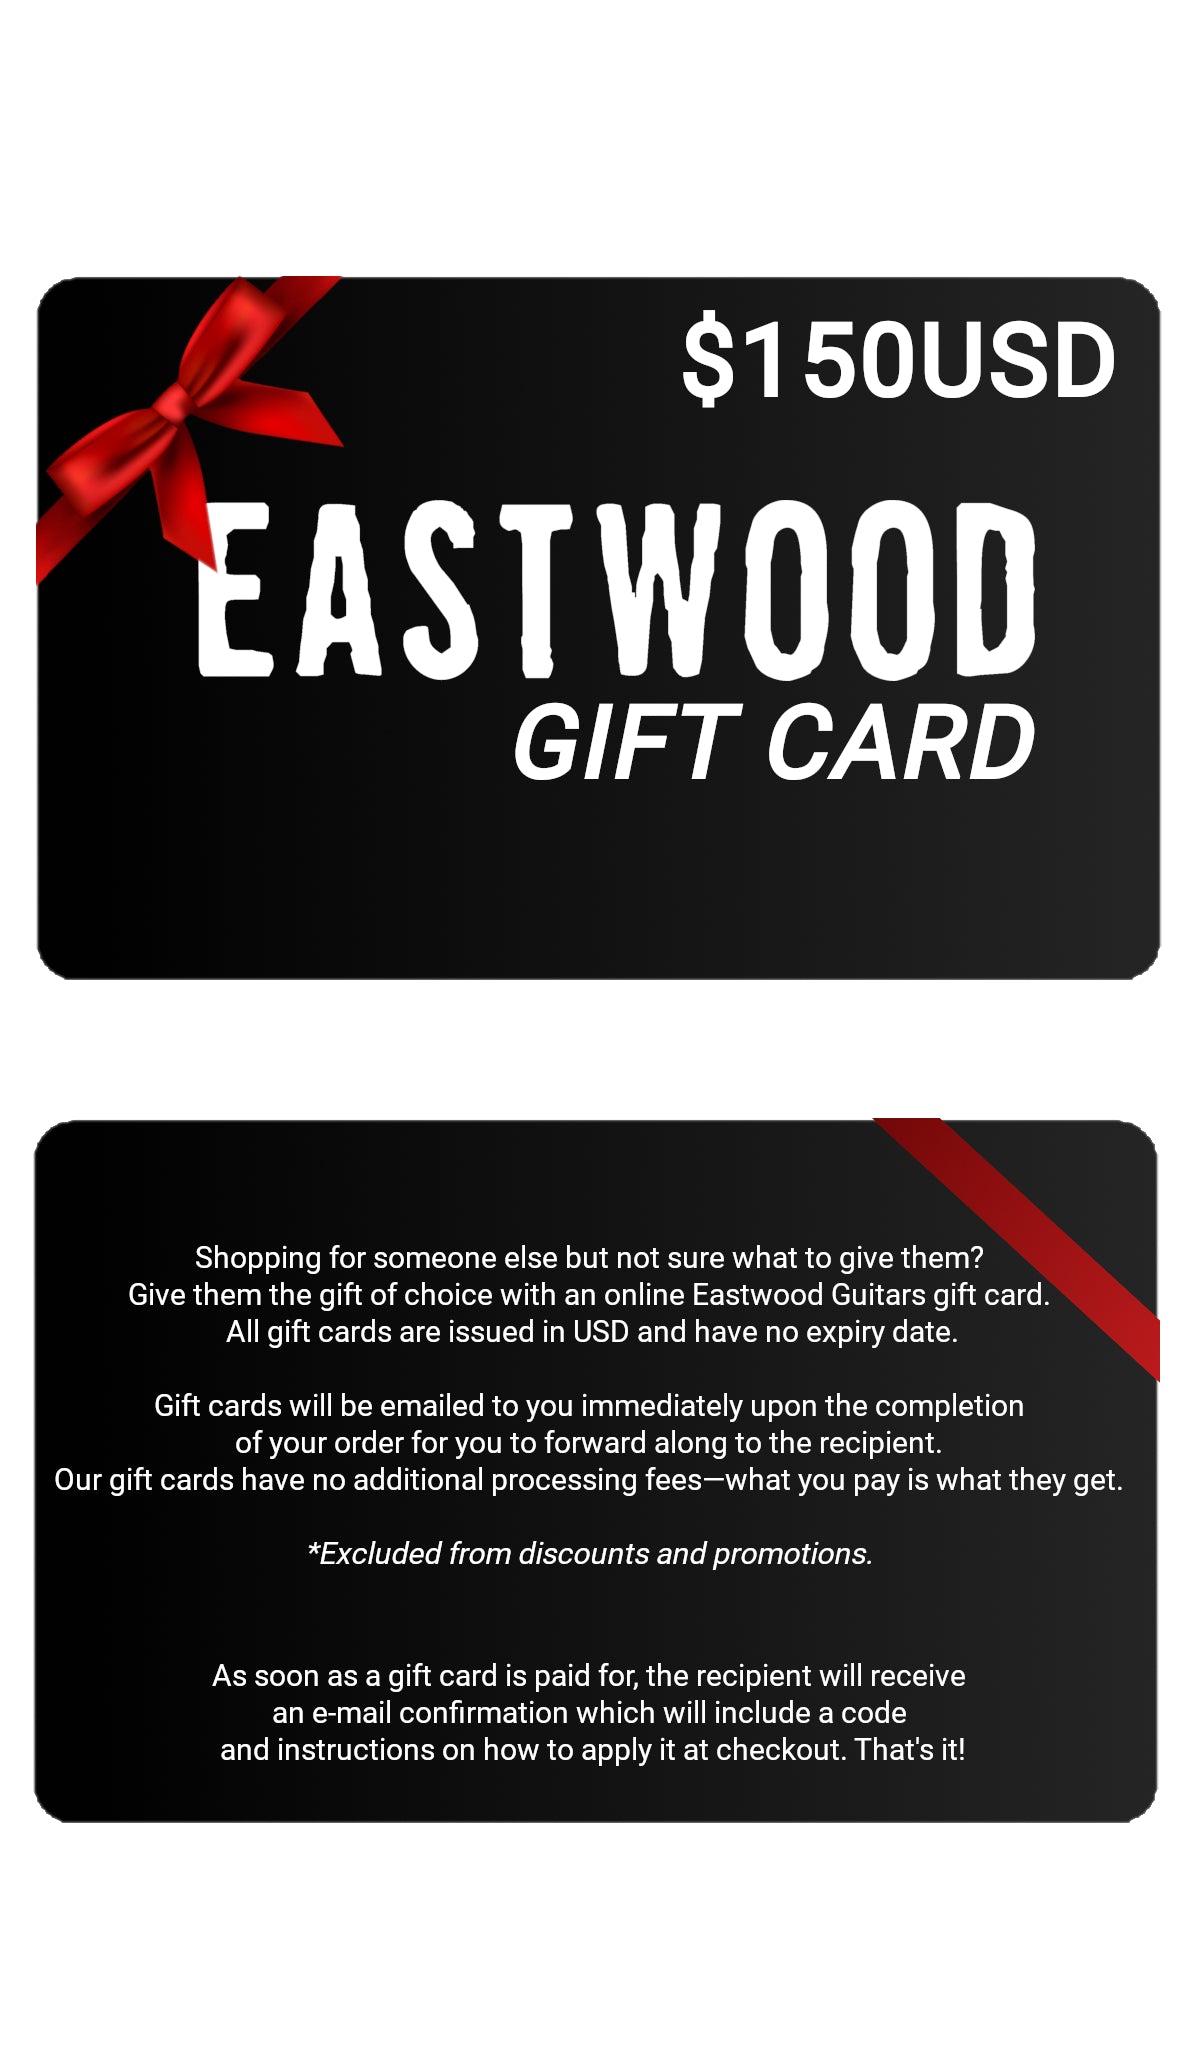 Eastwood Guitars Eastwood Gift Cards $150